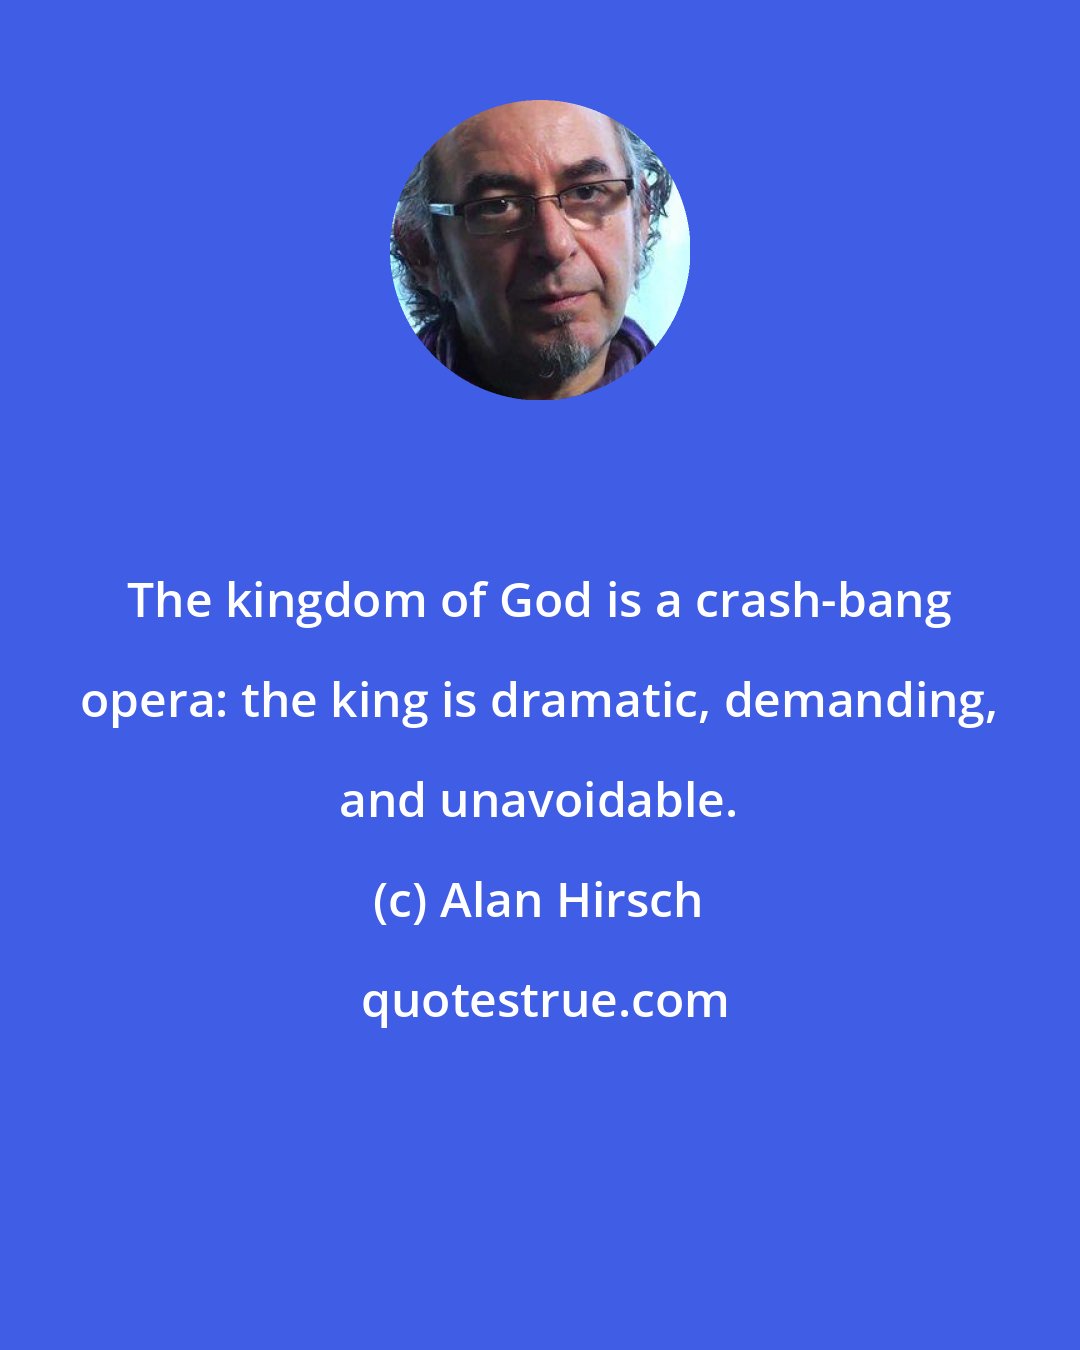 Alan Hirsch: The kingdom of God is a crash-bang opera: the king is dramatic, demanding, and unavoidable.